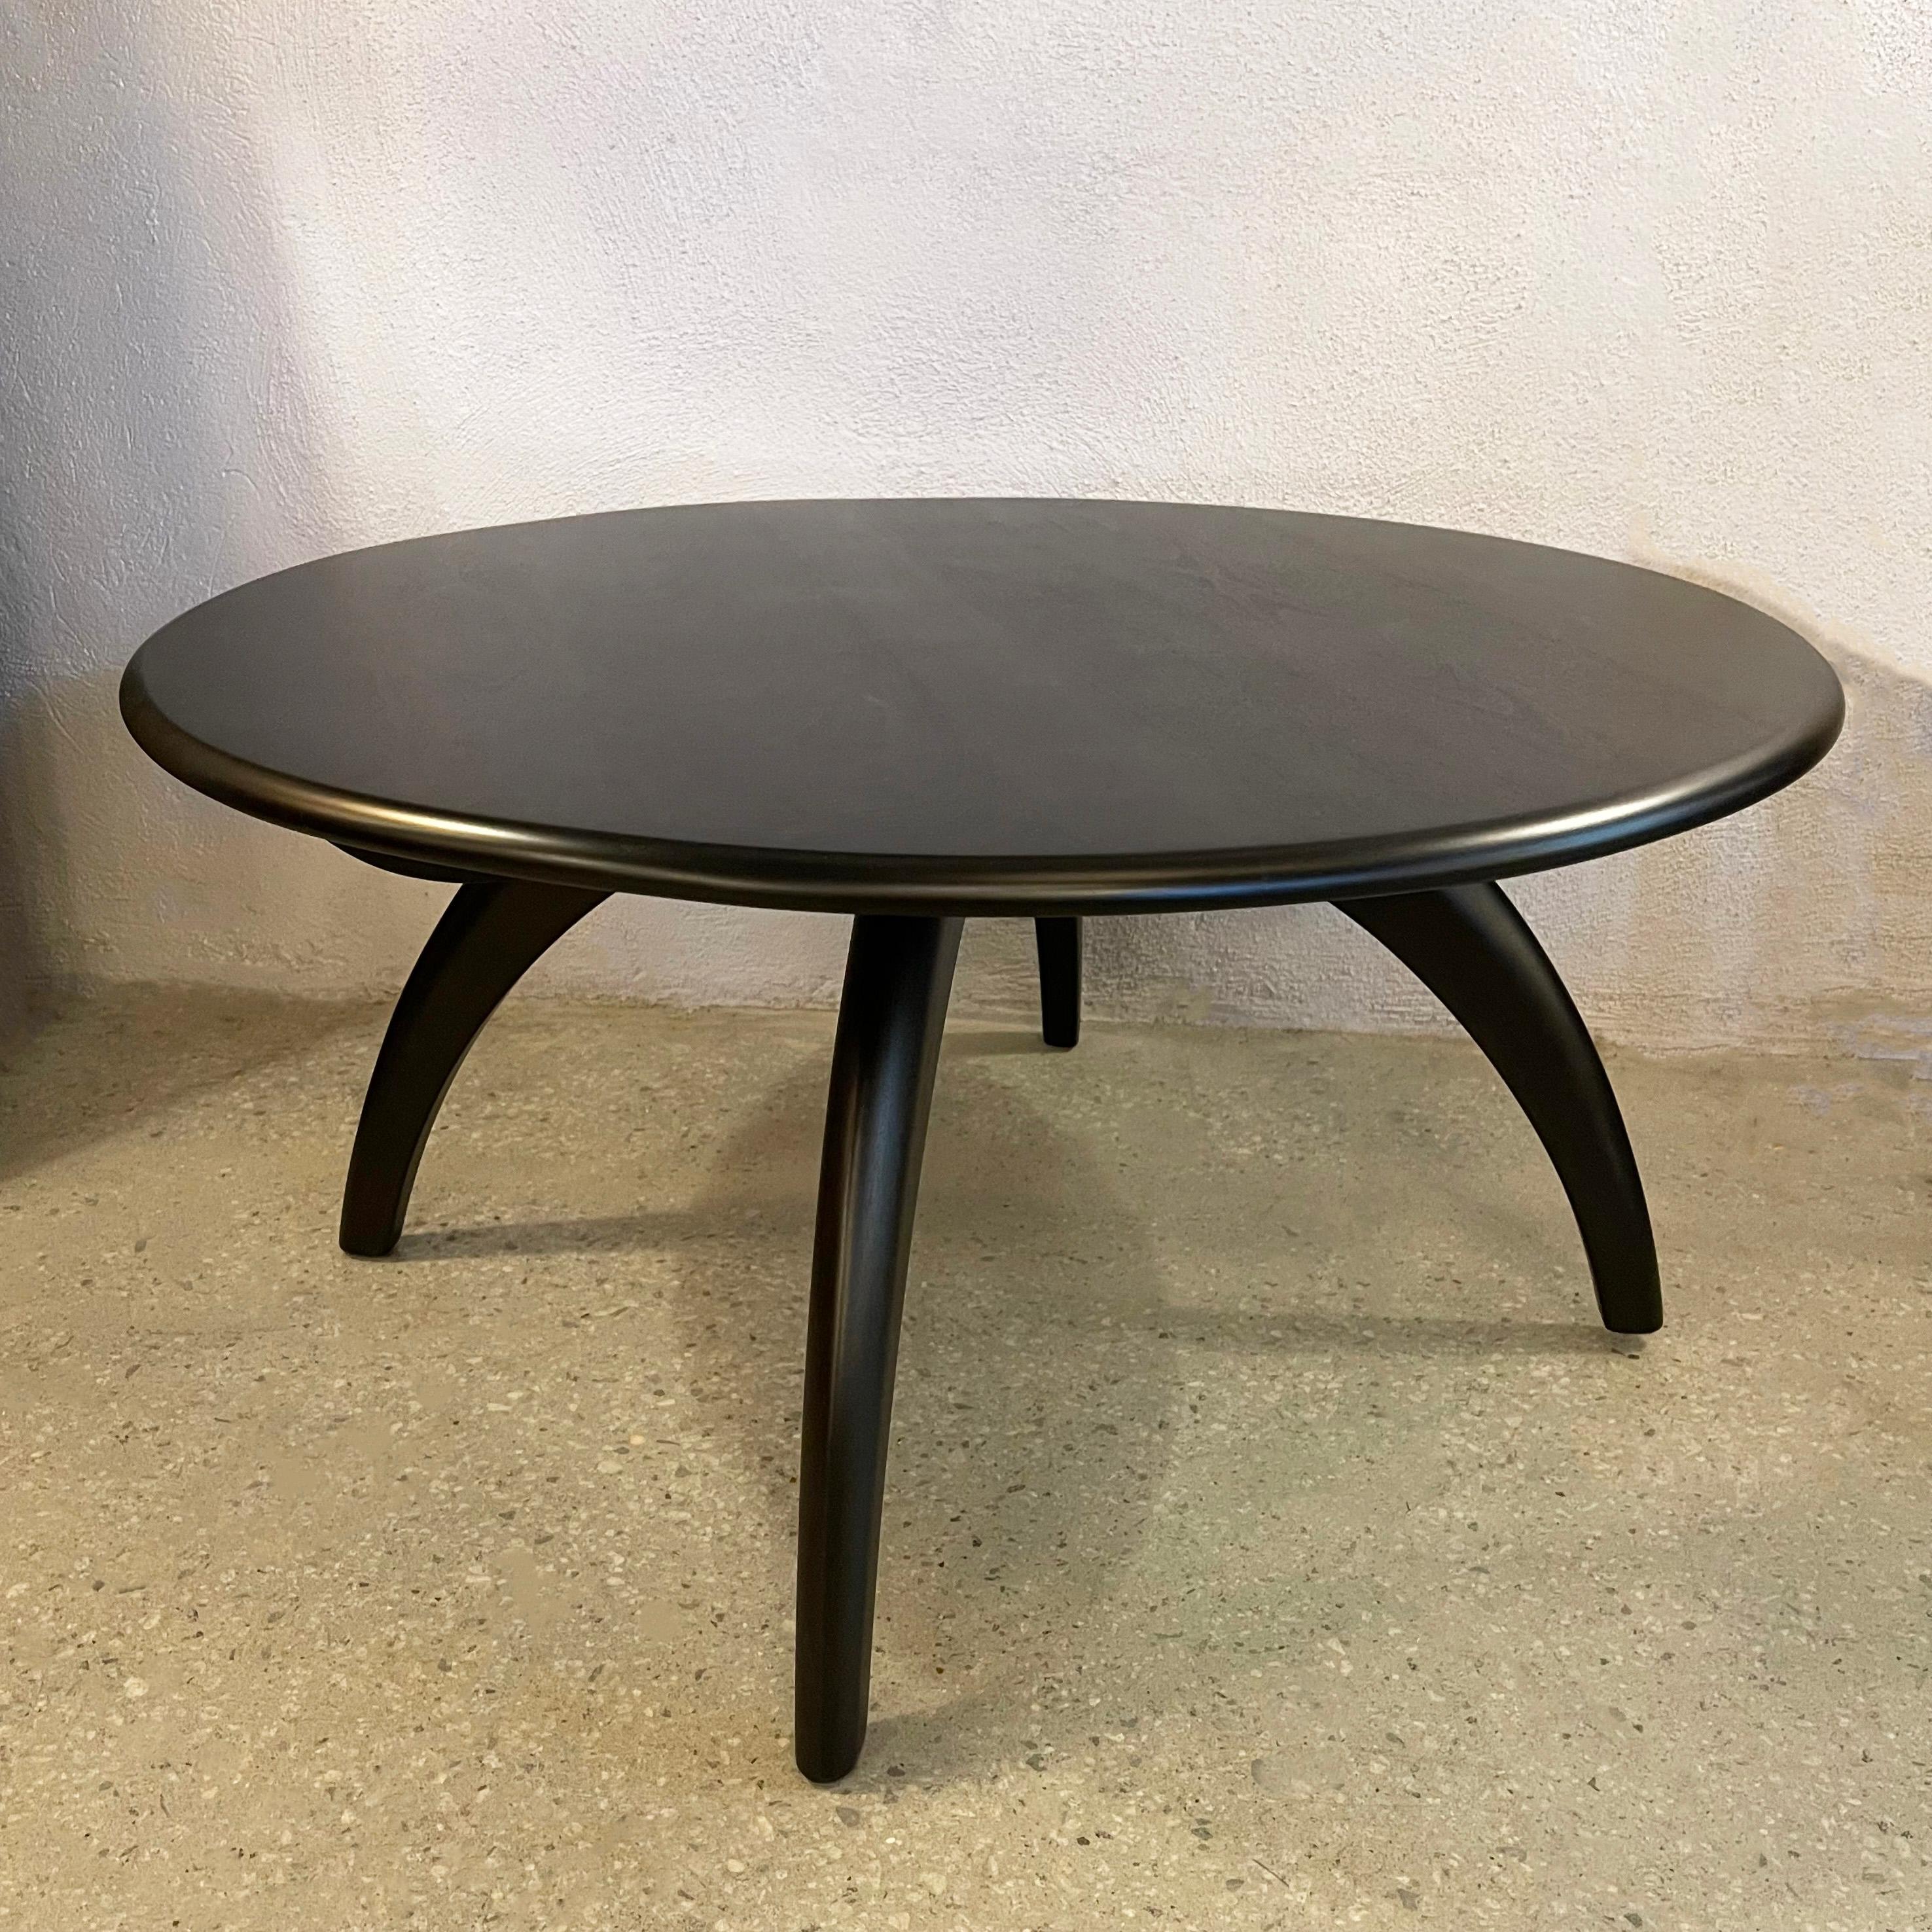 Iconic, Art Deco inspired, Mid-Century Modern, solid ebonized maple, round coffee table by Heywood Wakefield Co. features a 32 inch round 